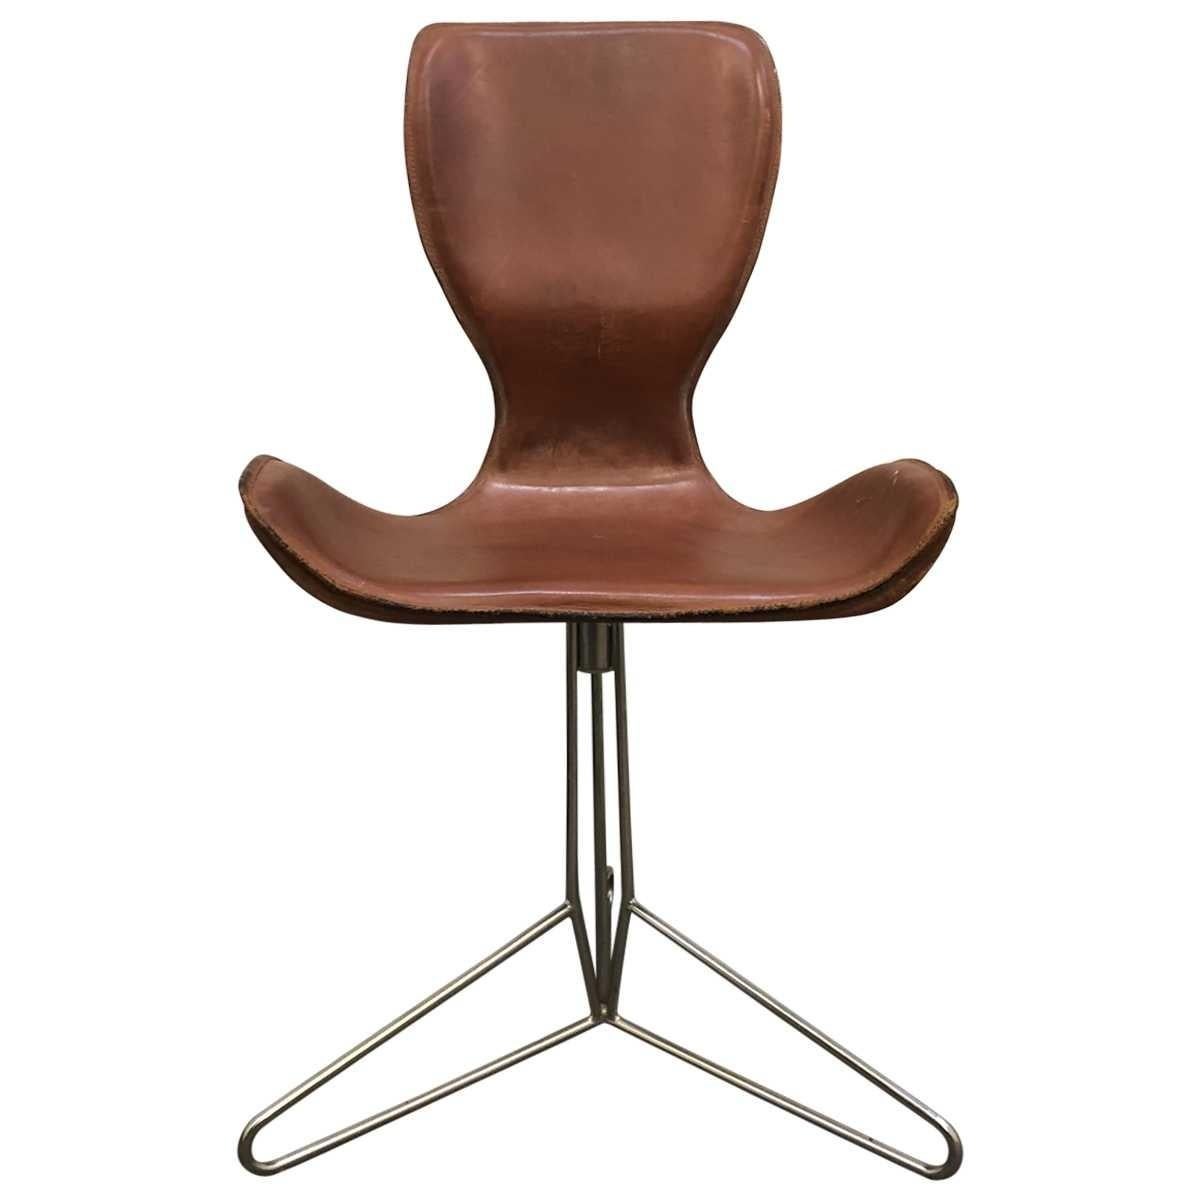 Pair of Swivel Chairs in the style of Arne Jacobsen 2